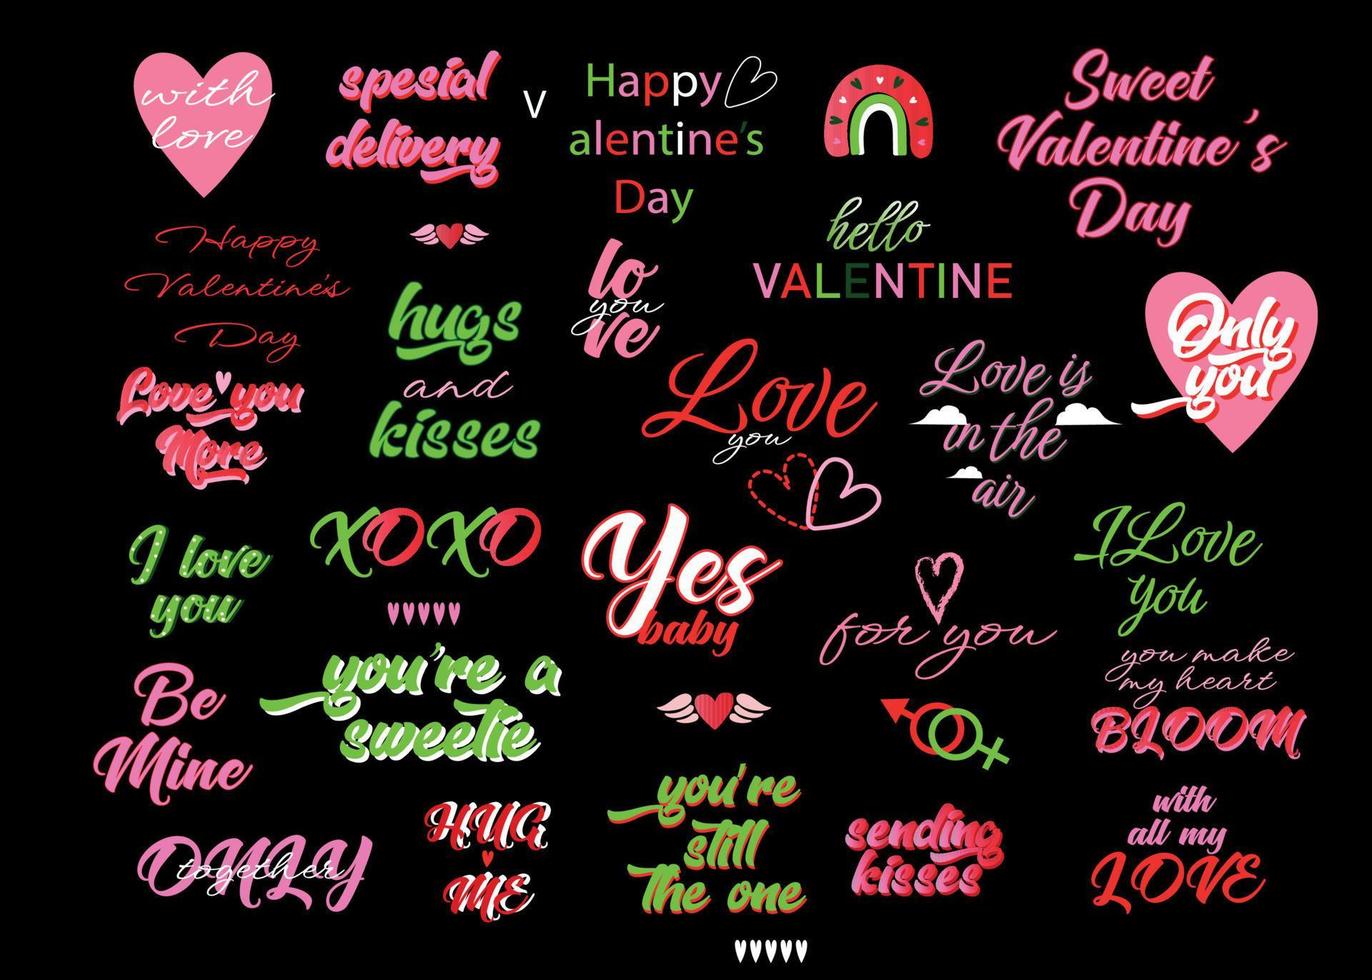 Happy Valentine's Day card. Set of calligraphic quotes. Happy typographic background. Valentine hand lettering text isolated on dark background. vector